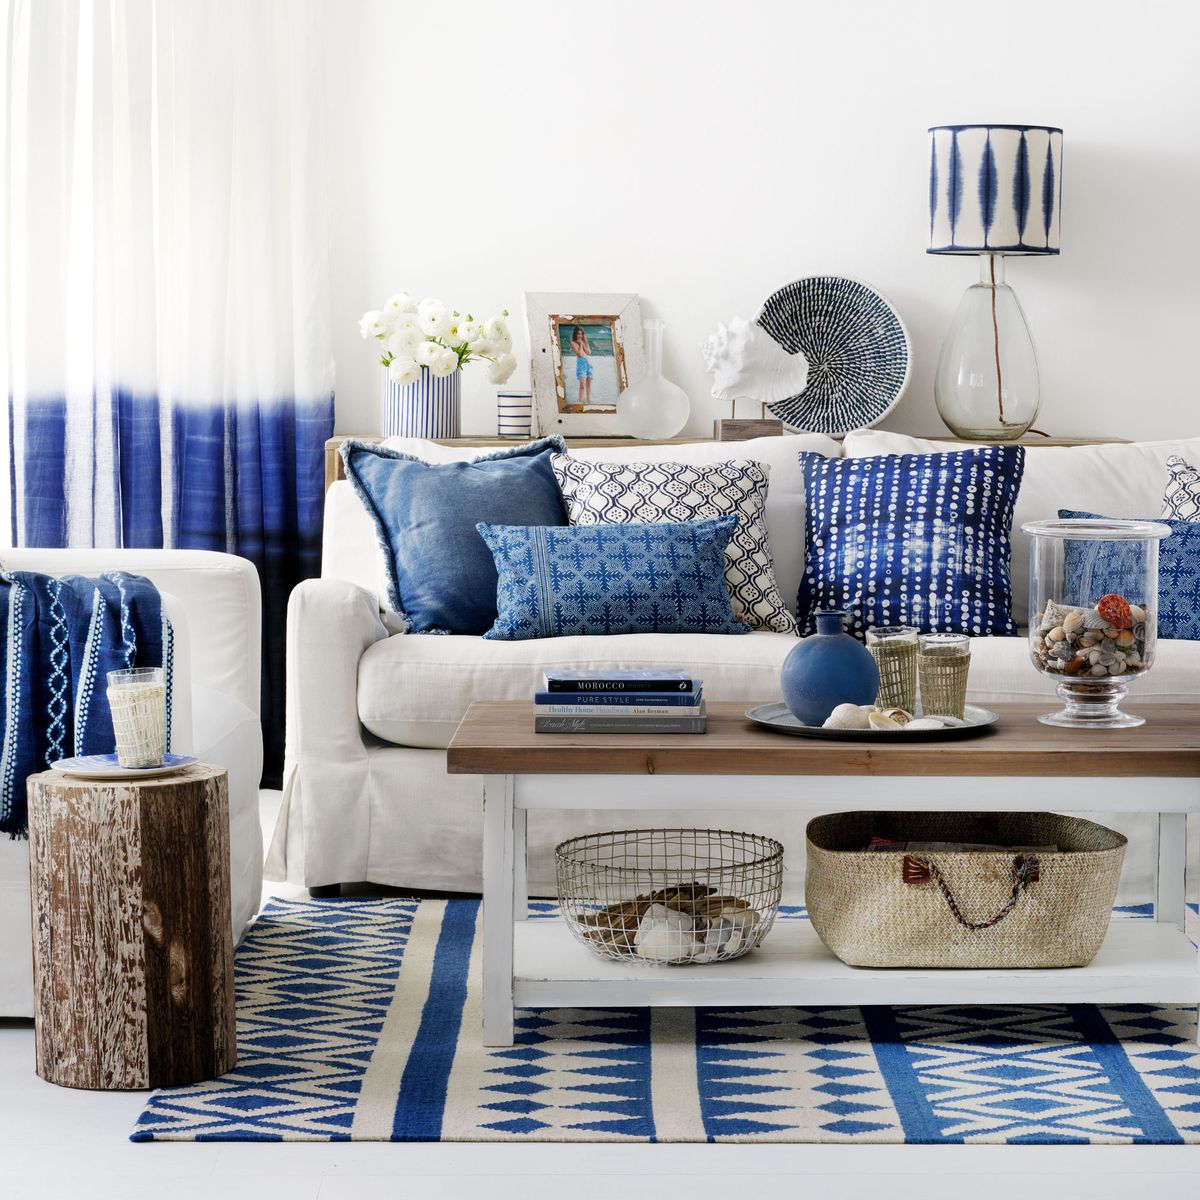 Navy Blue & White Stripes - Mix & Match with Simplicity of Life